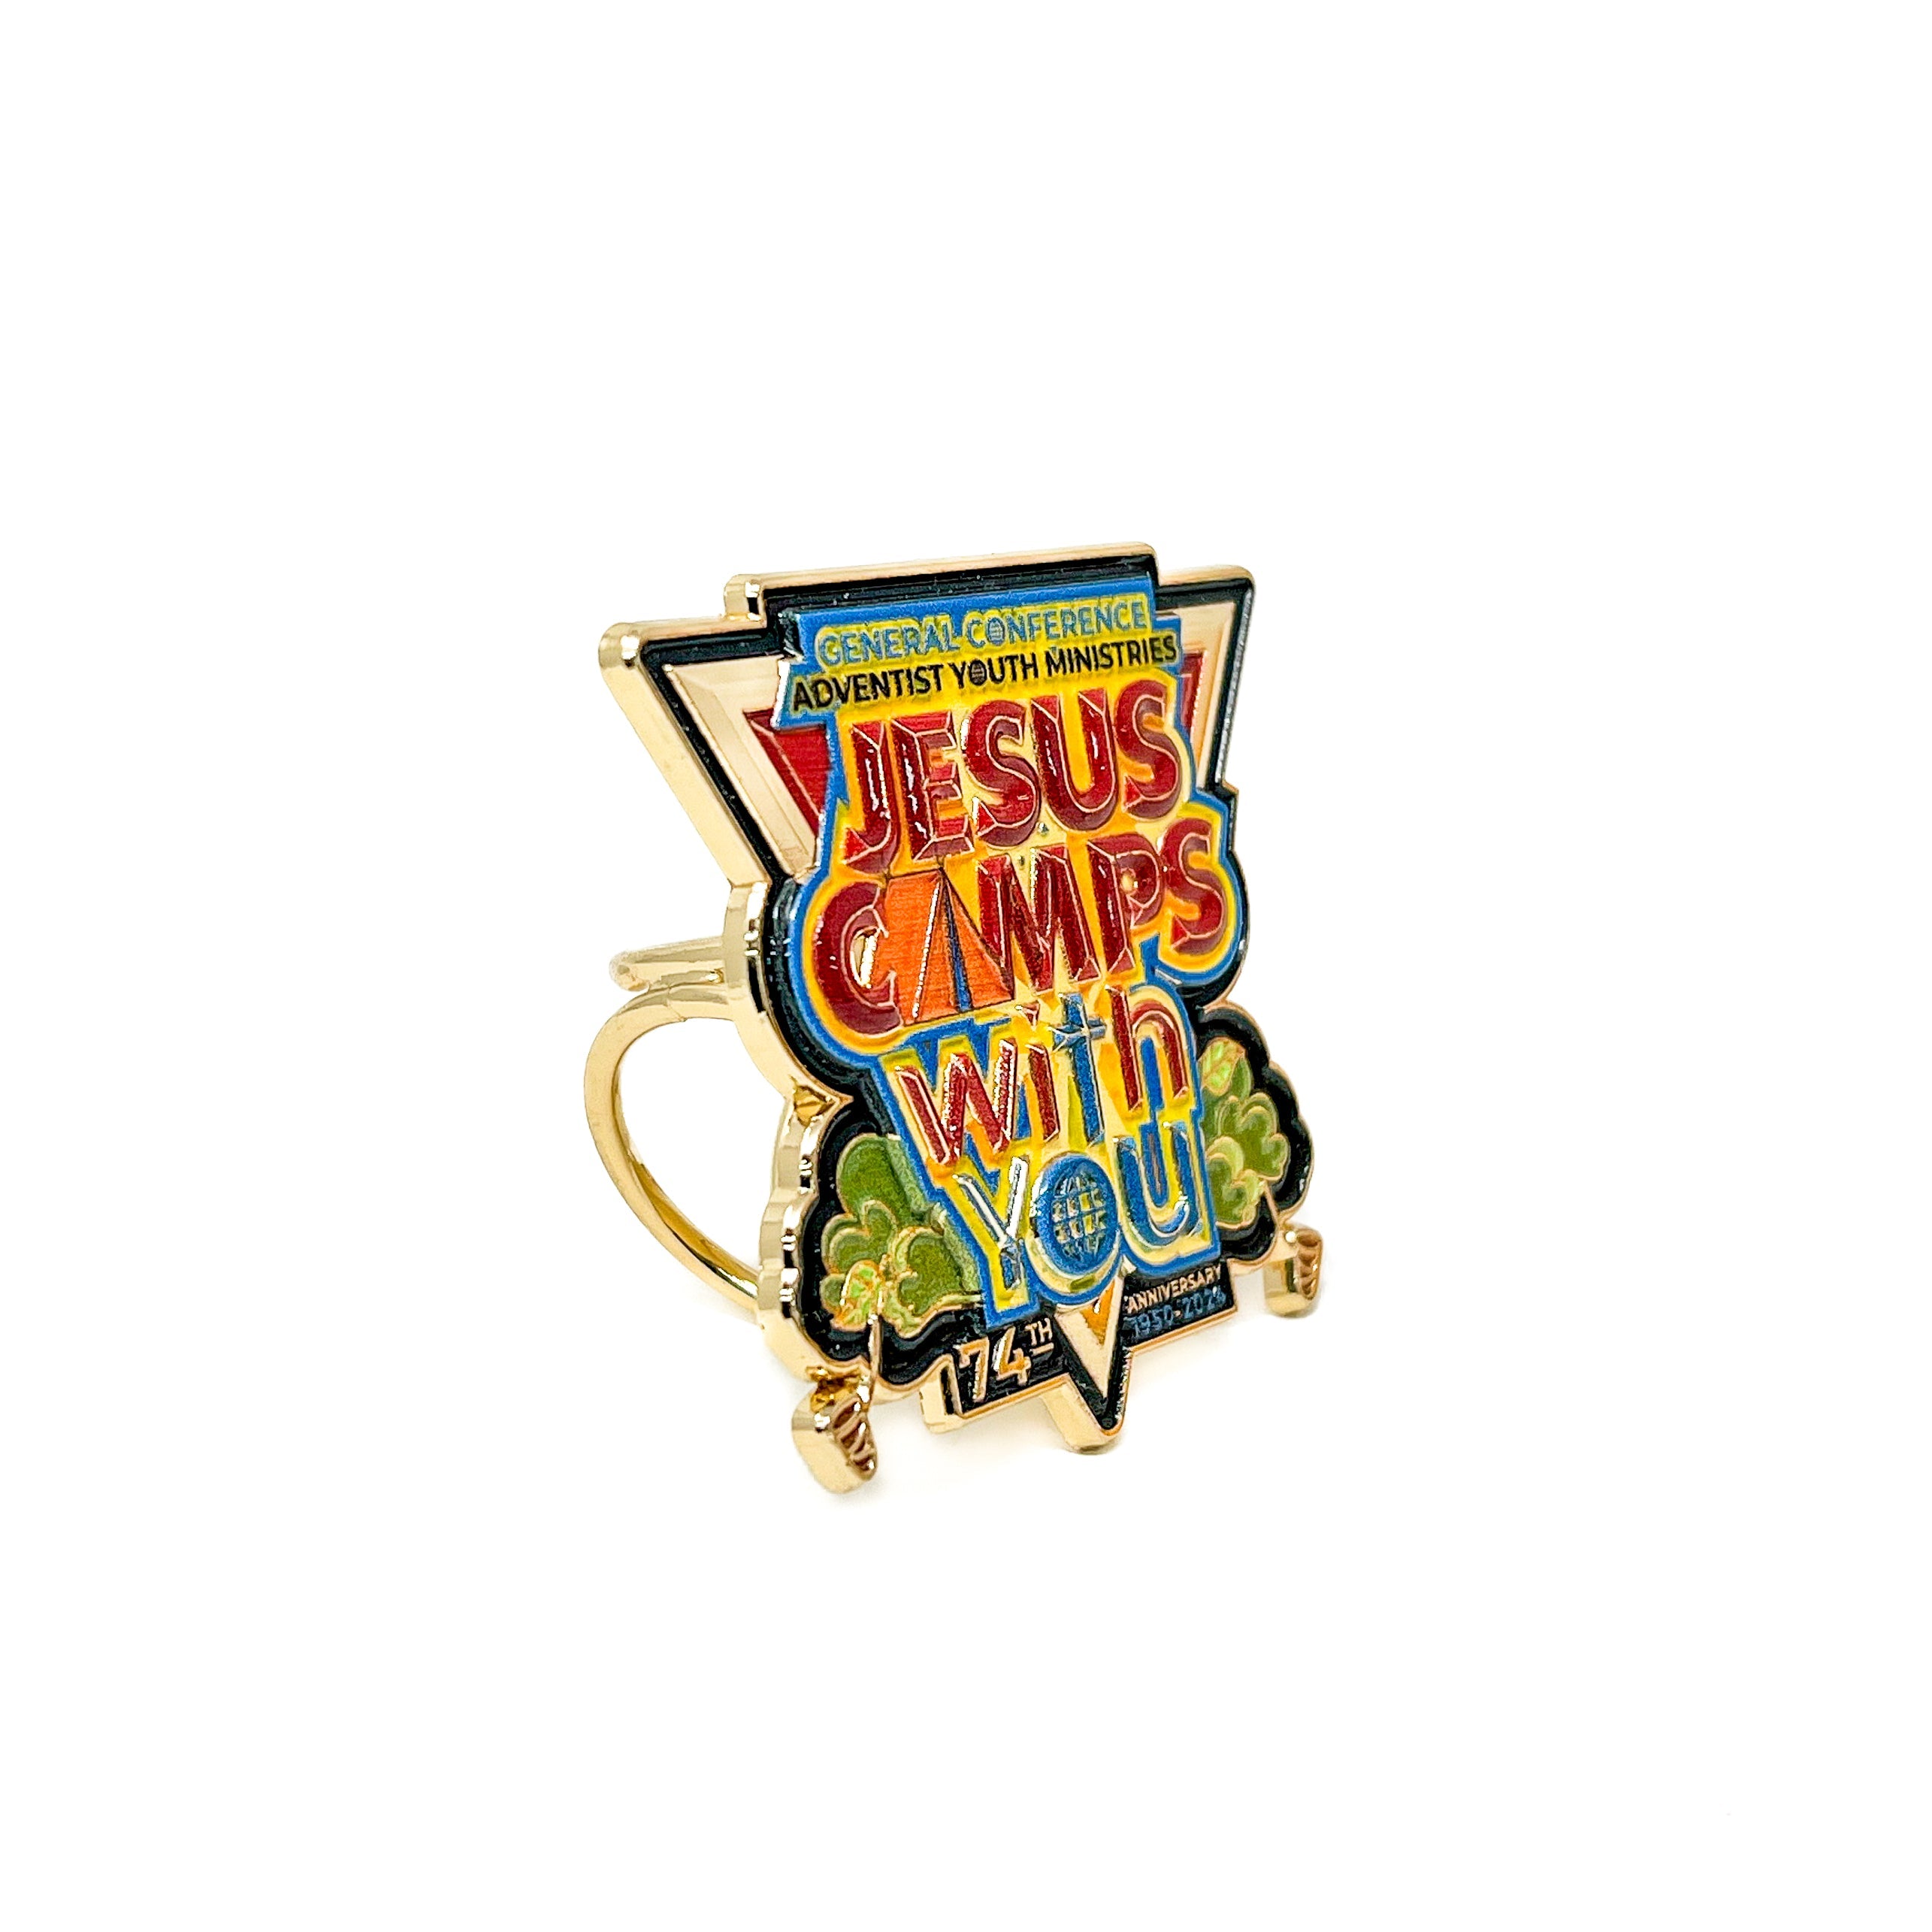 World Pathfinder Day 2024 "Jesus Camps With You" Scarf Slide